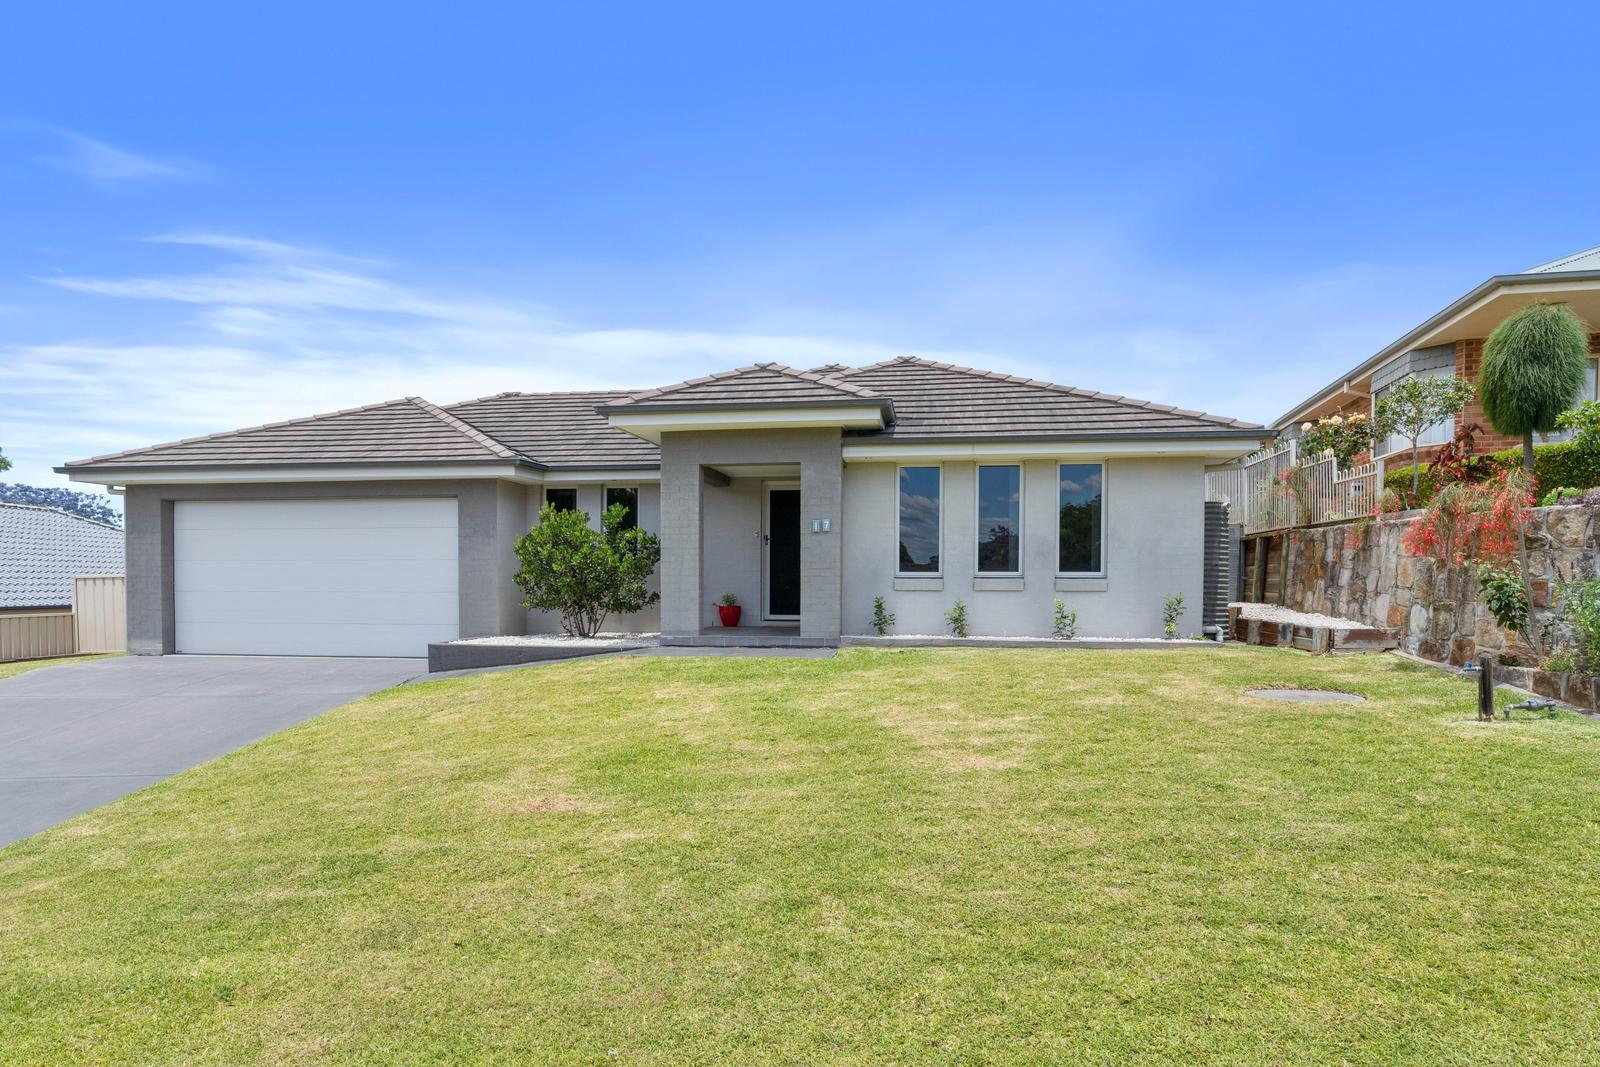 Sold House 17 Stanley Close, Bolwarra Heights NSW 2320 - Mar 22, 2023 ...